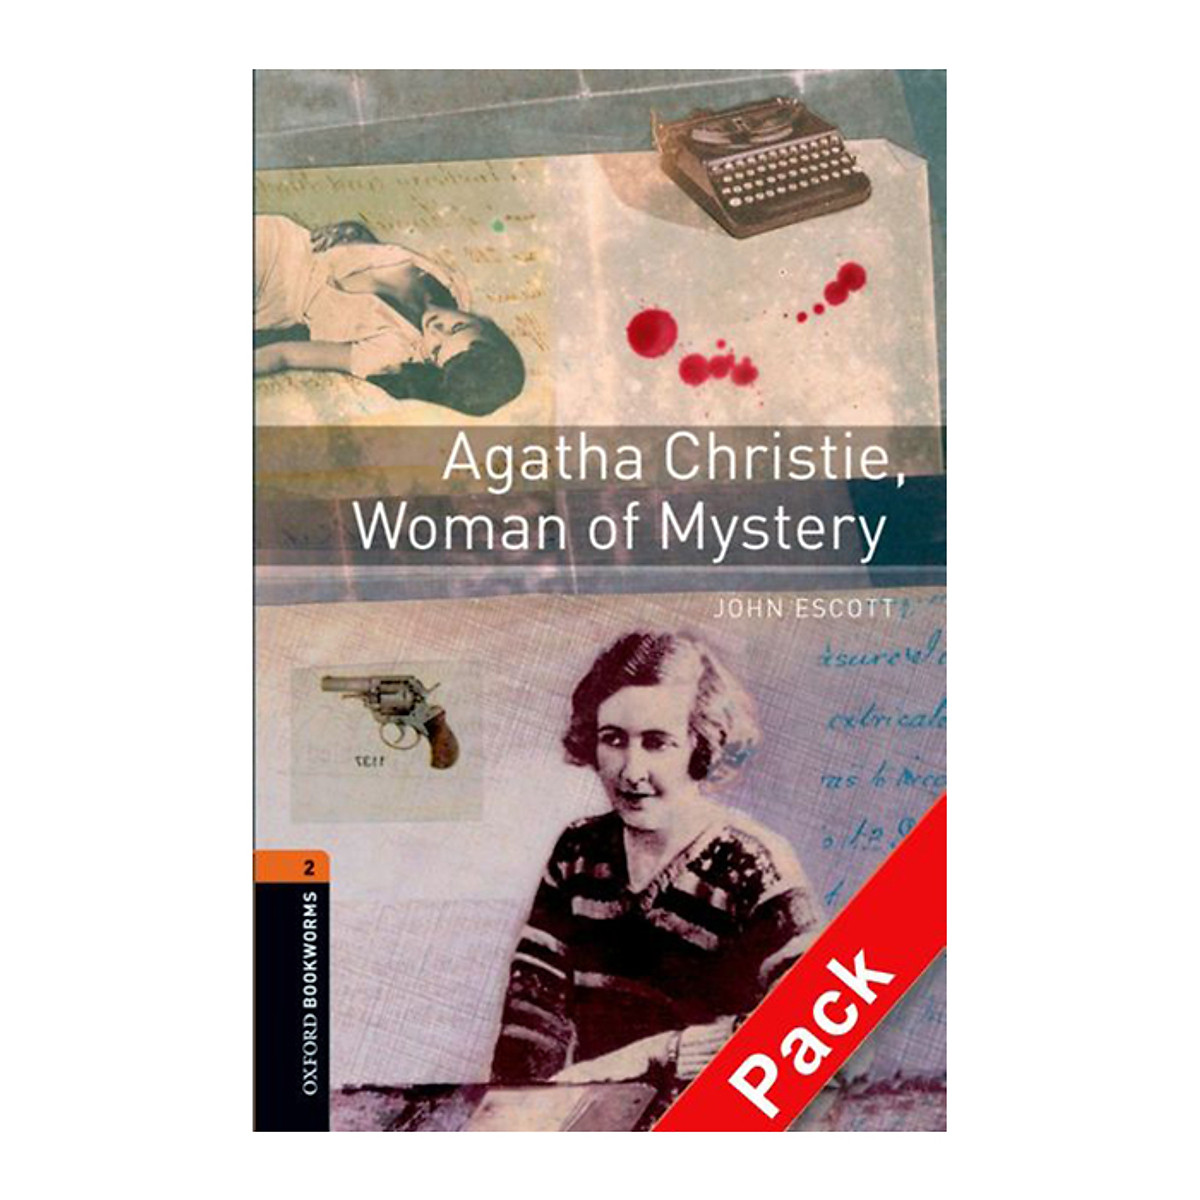 Woman　audio　Tiki　of　2:　CD　Agatha　Level　Library　Bookworms　Mystery　Mua　pack　Oxford　Christie,